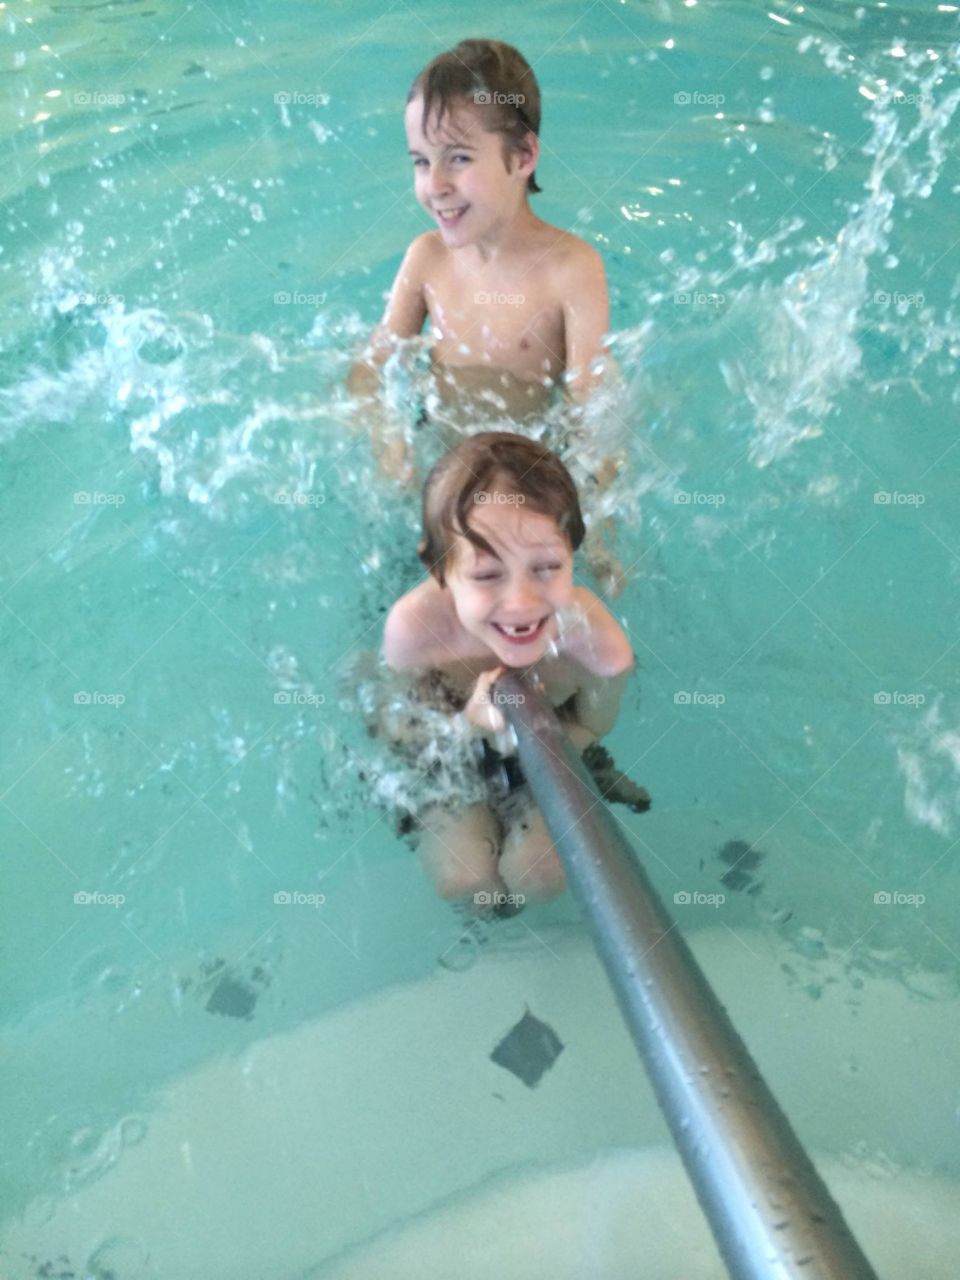 My two youngest boys having a blast at an indoor pool